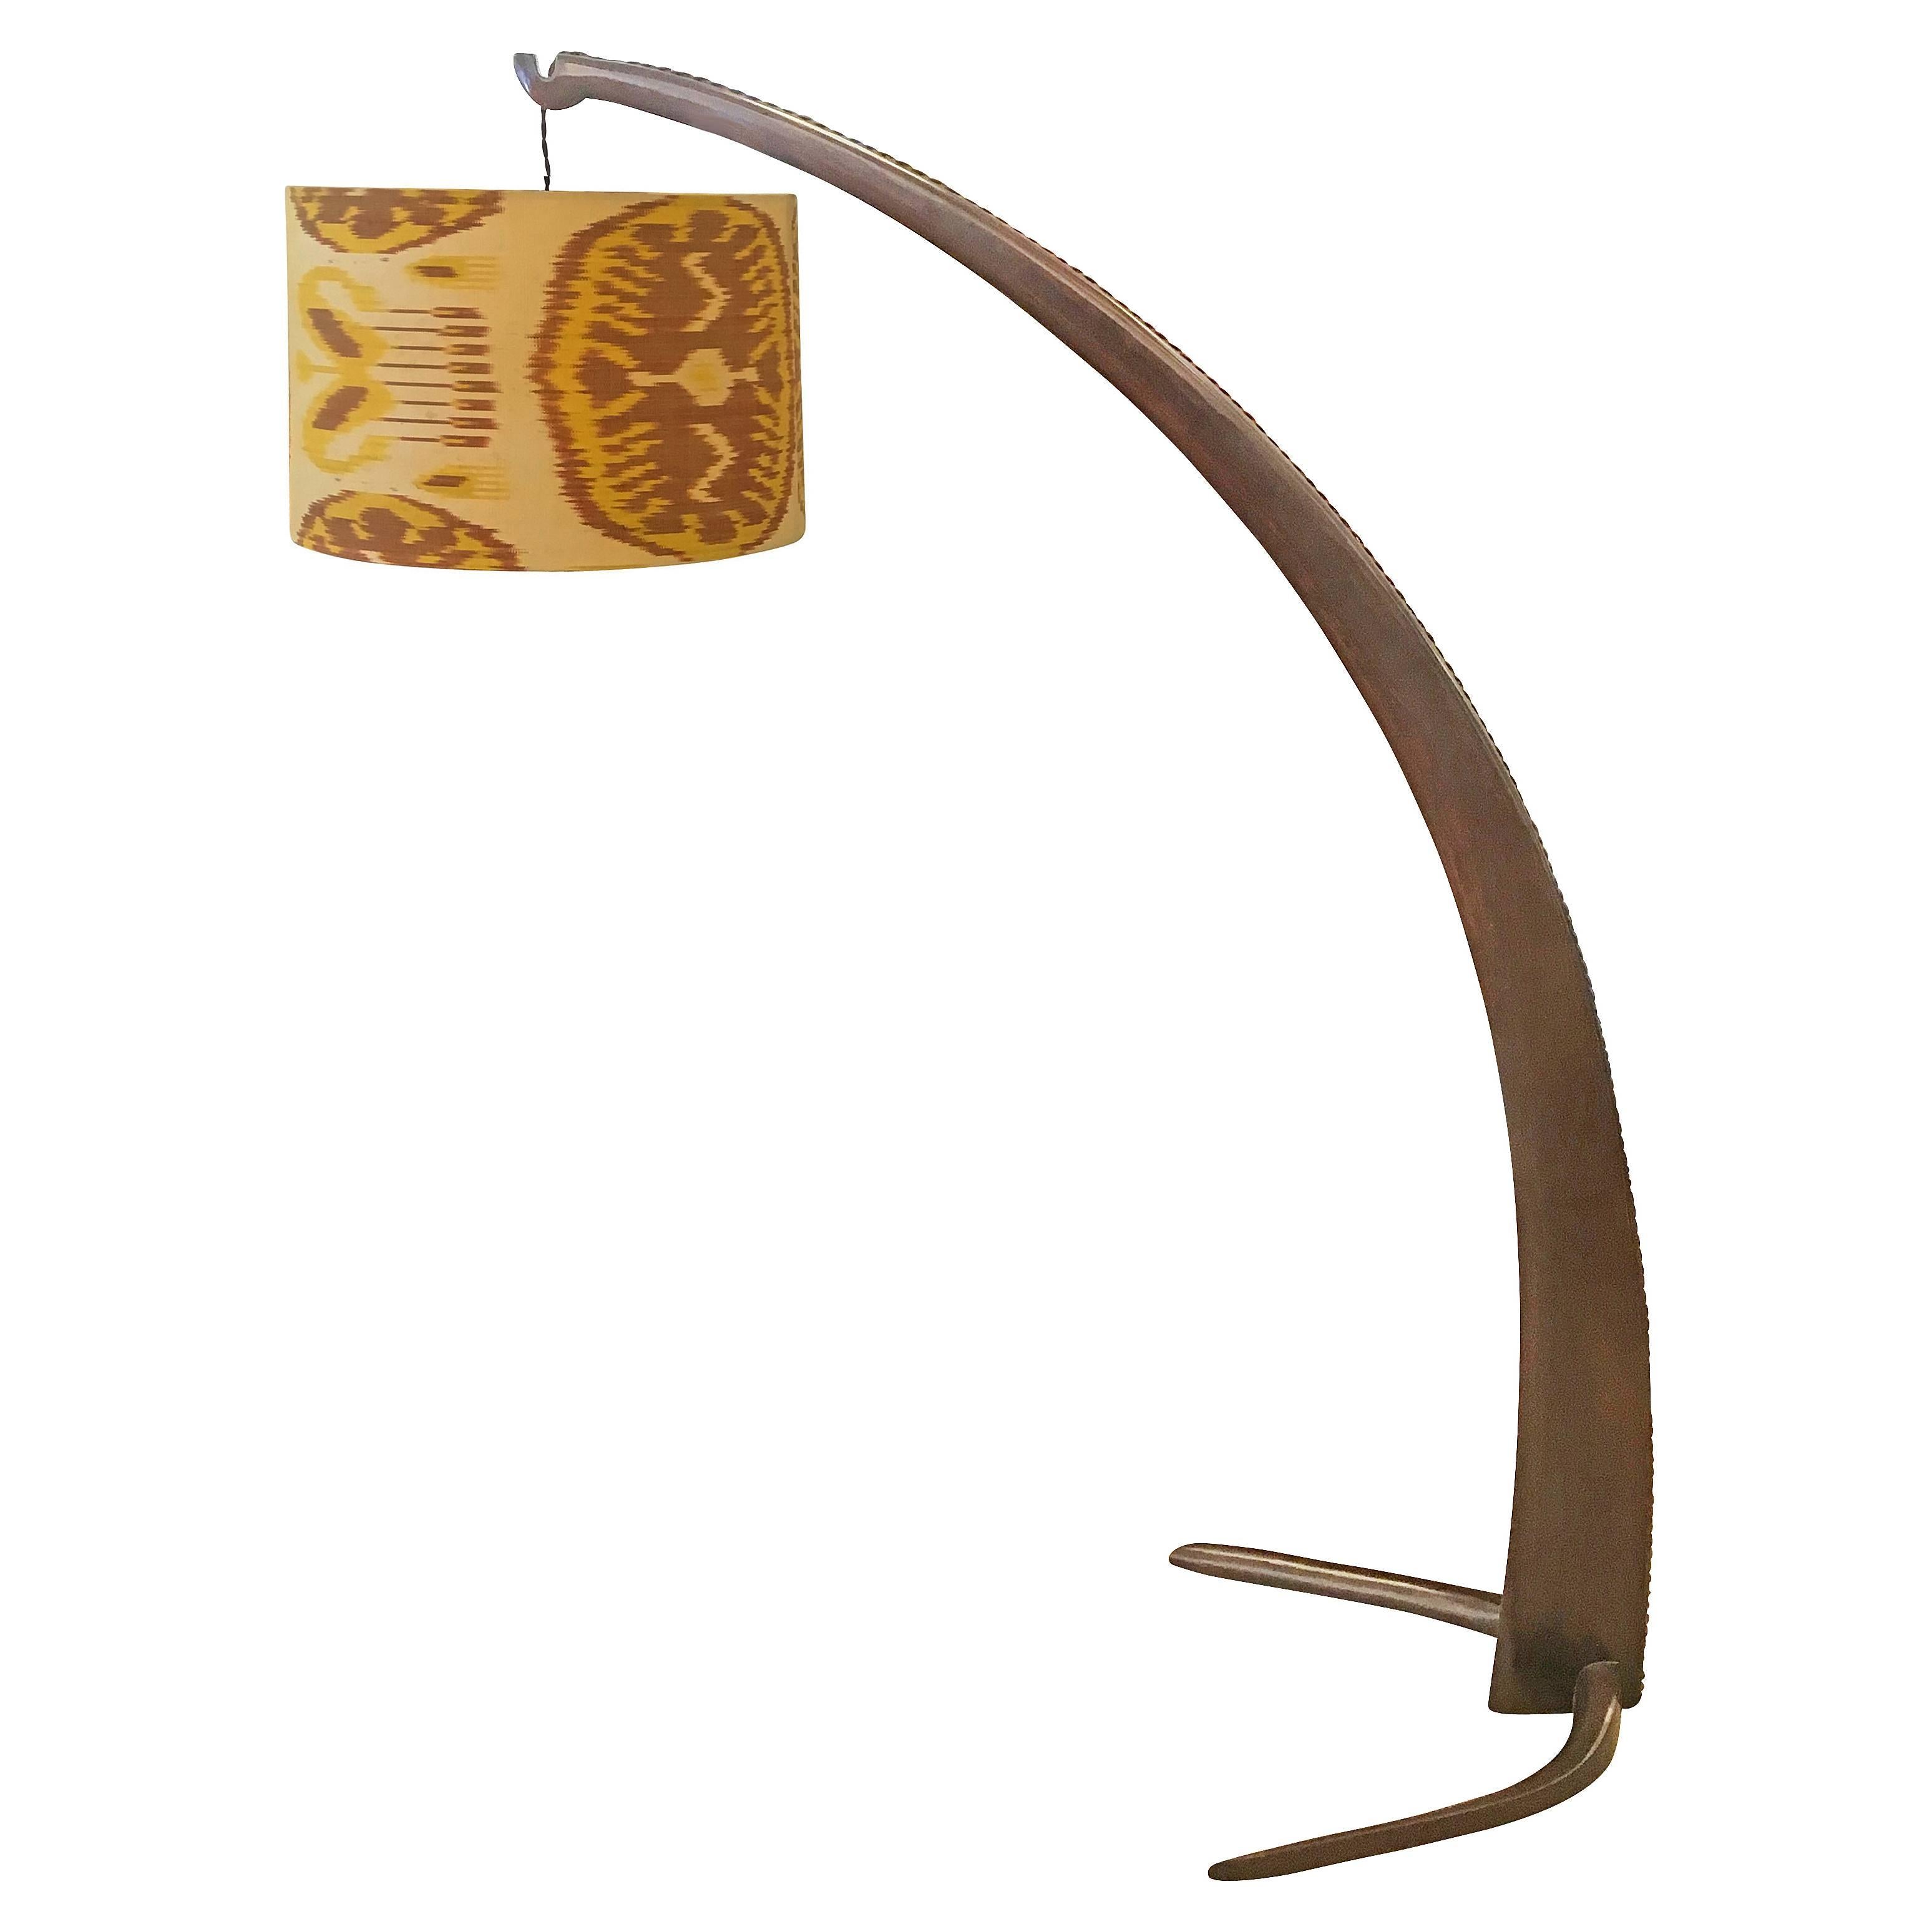 Tusk shaped floor lamp made in walnut designed to project light above armchairs. It is the predecessor of the Arco lamp later designed by the Castiglioni brothers. Simple and amazing design. The shade can easily be replaced with a client provided